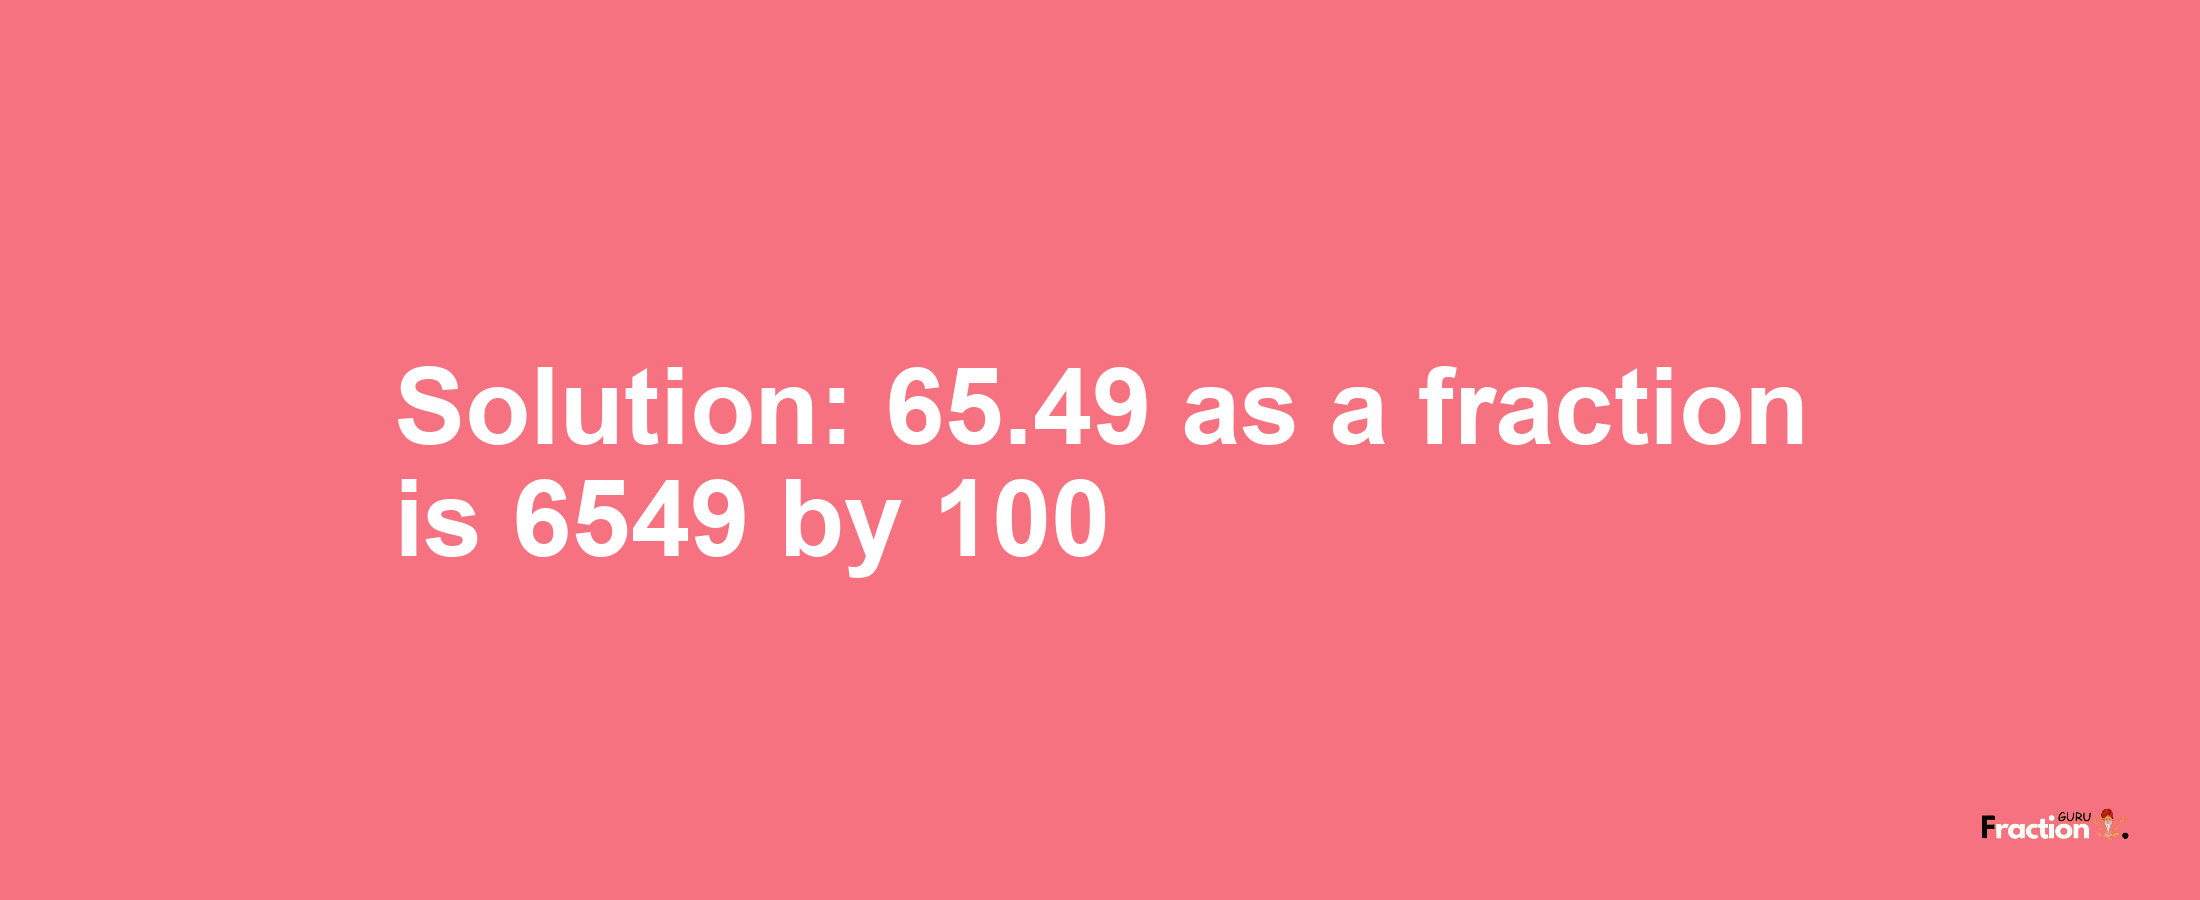 Solution:65.49 as a fraction is 6549/100